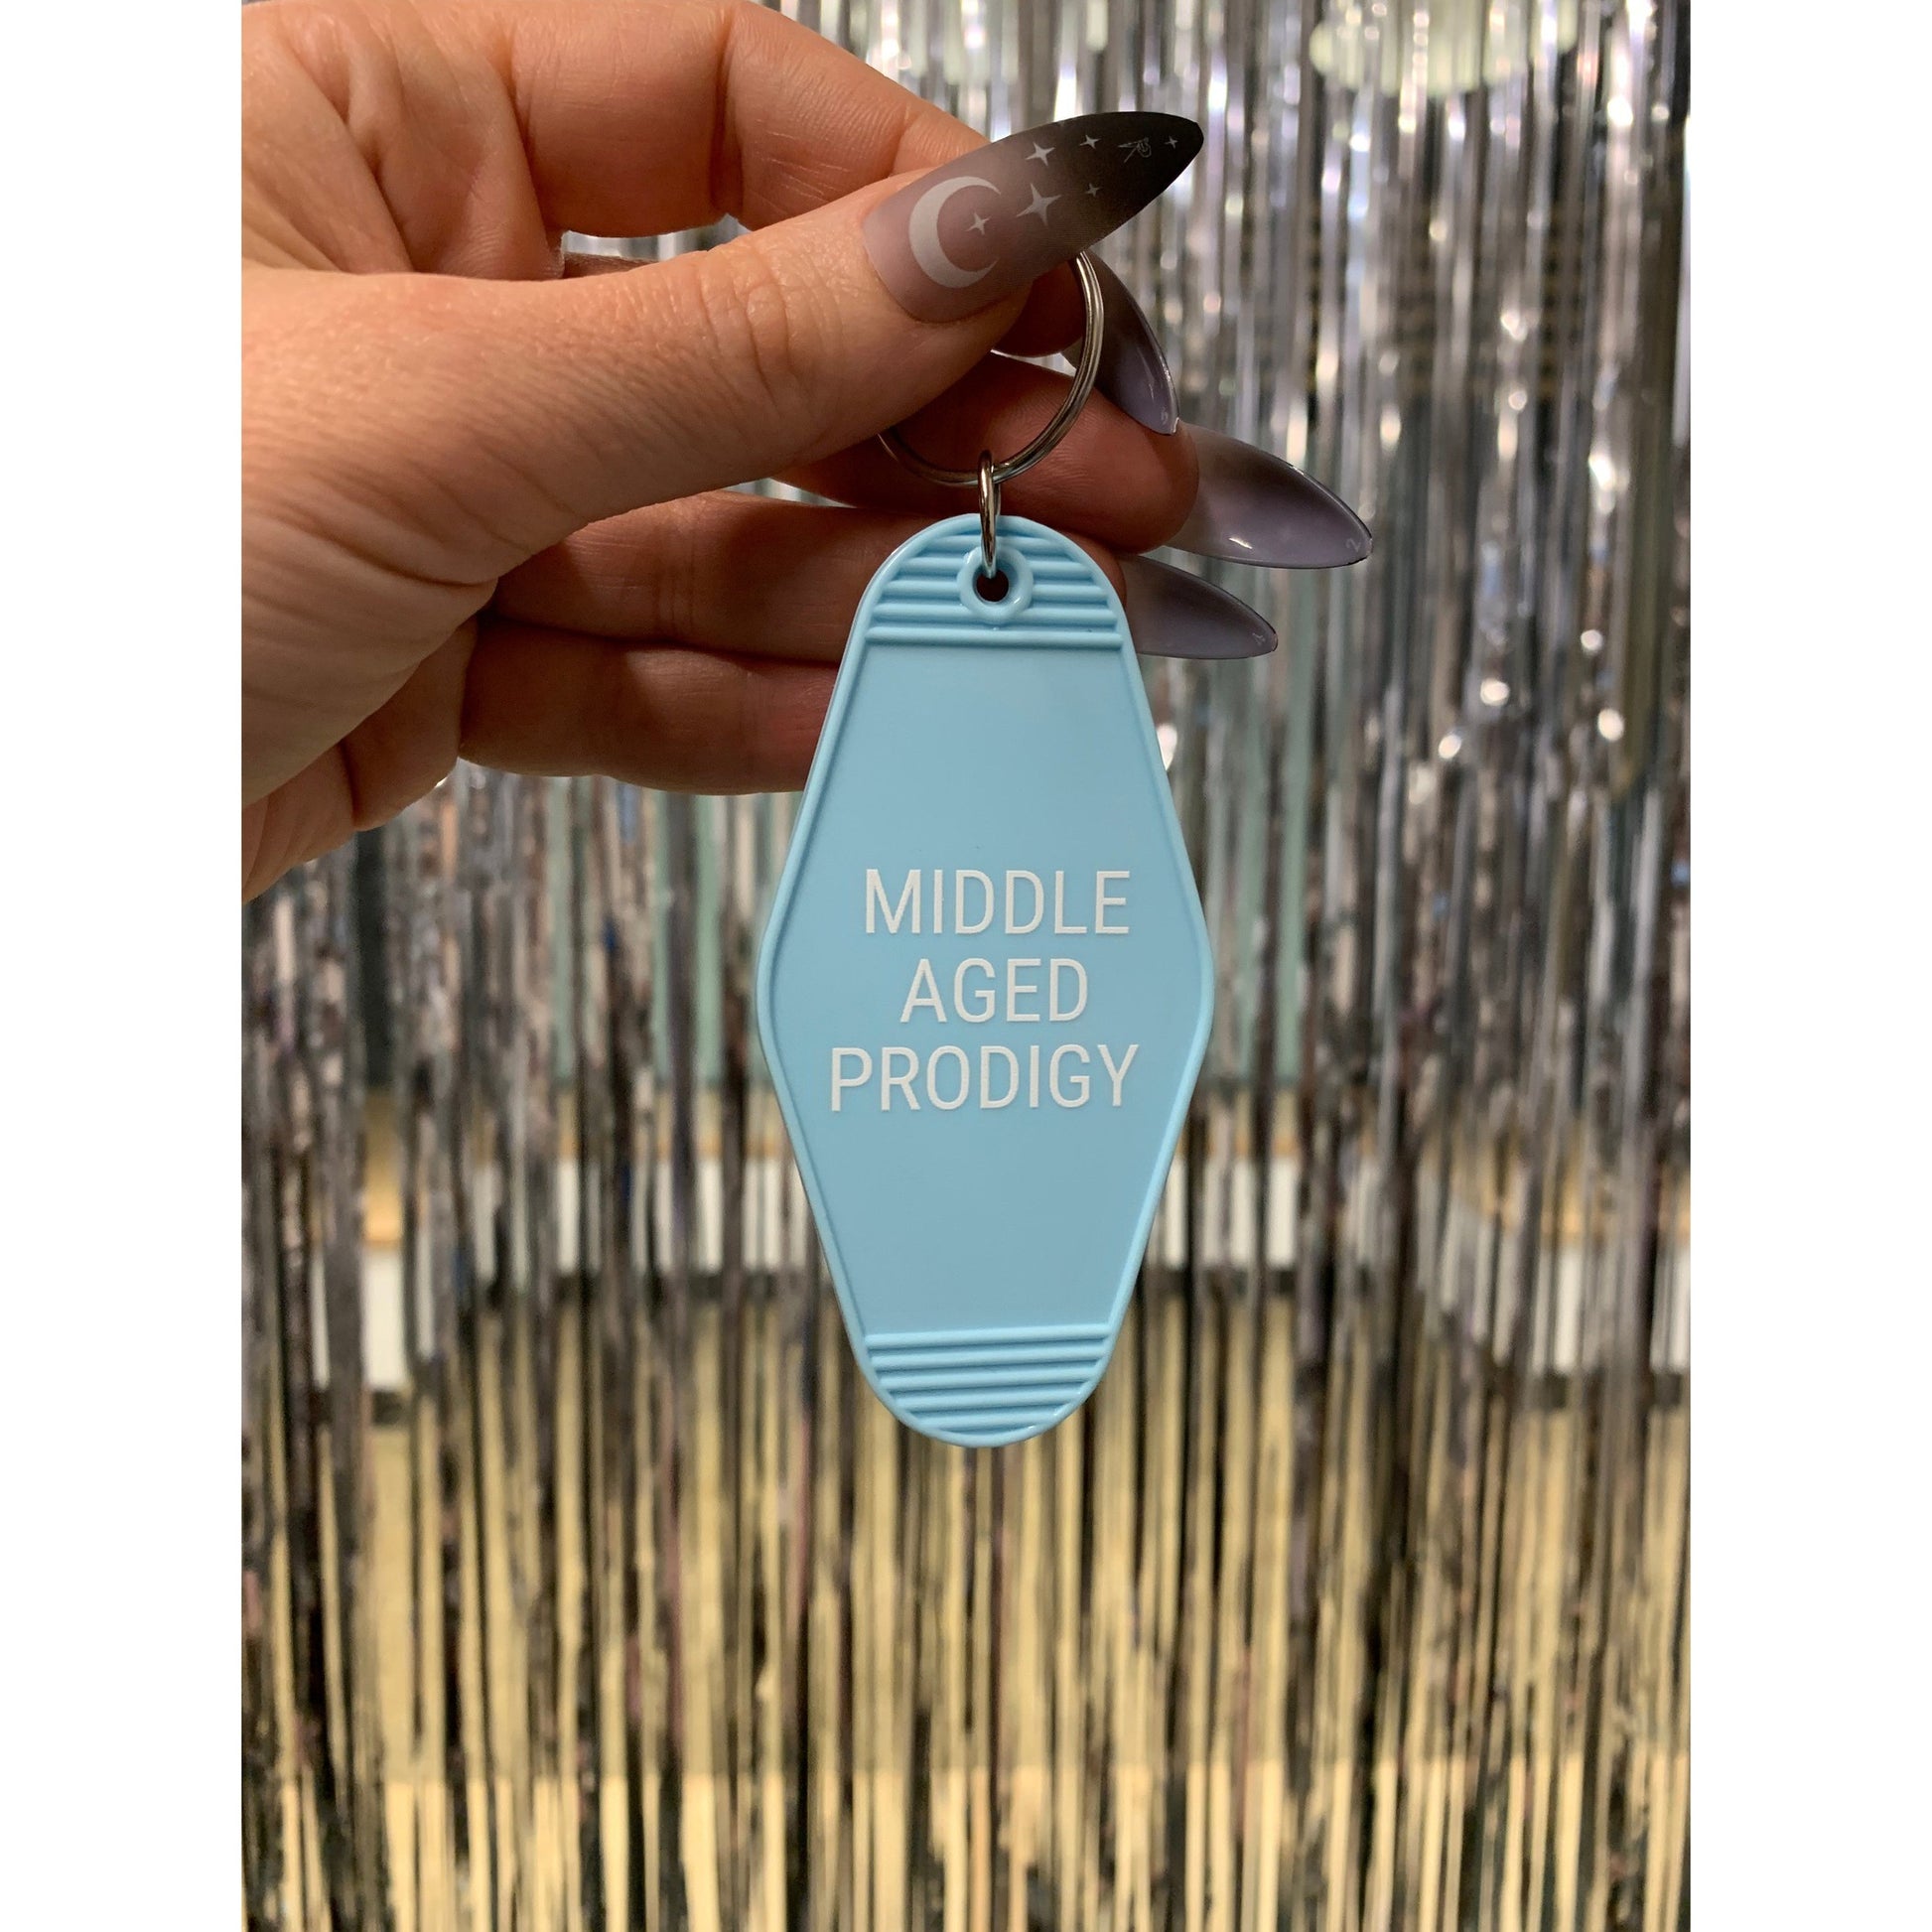 Middle Aged Prodigy Motel Style Keychain in Blue